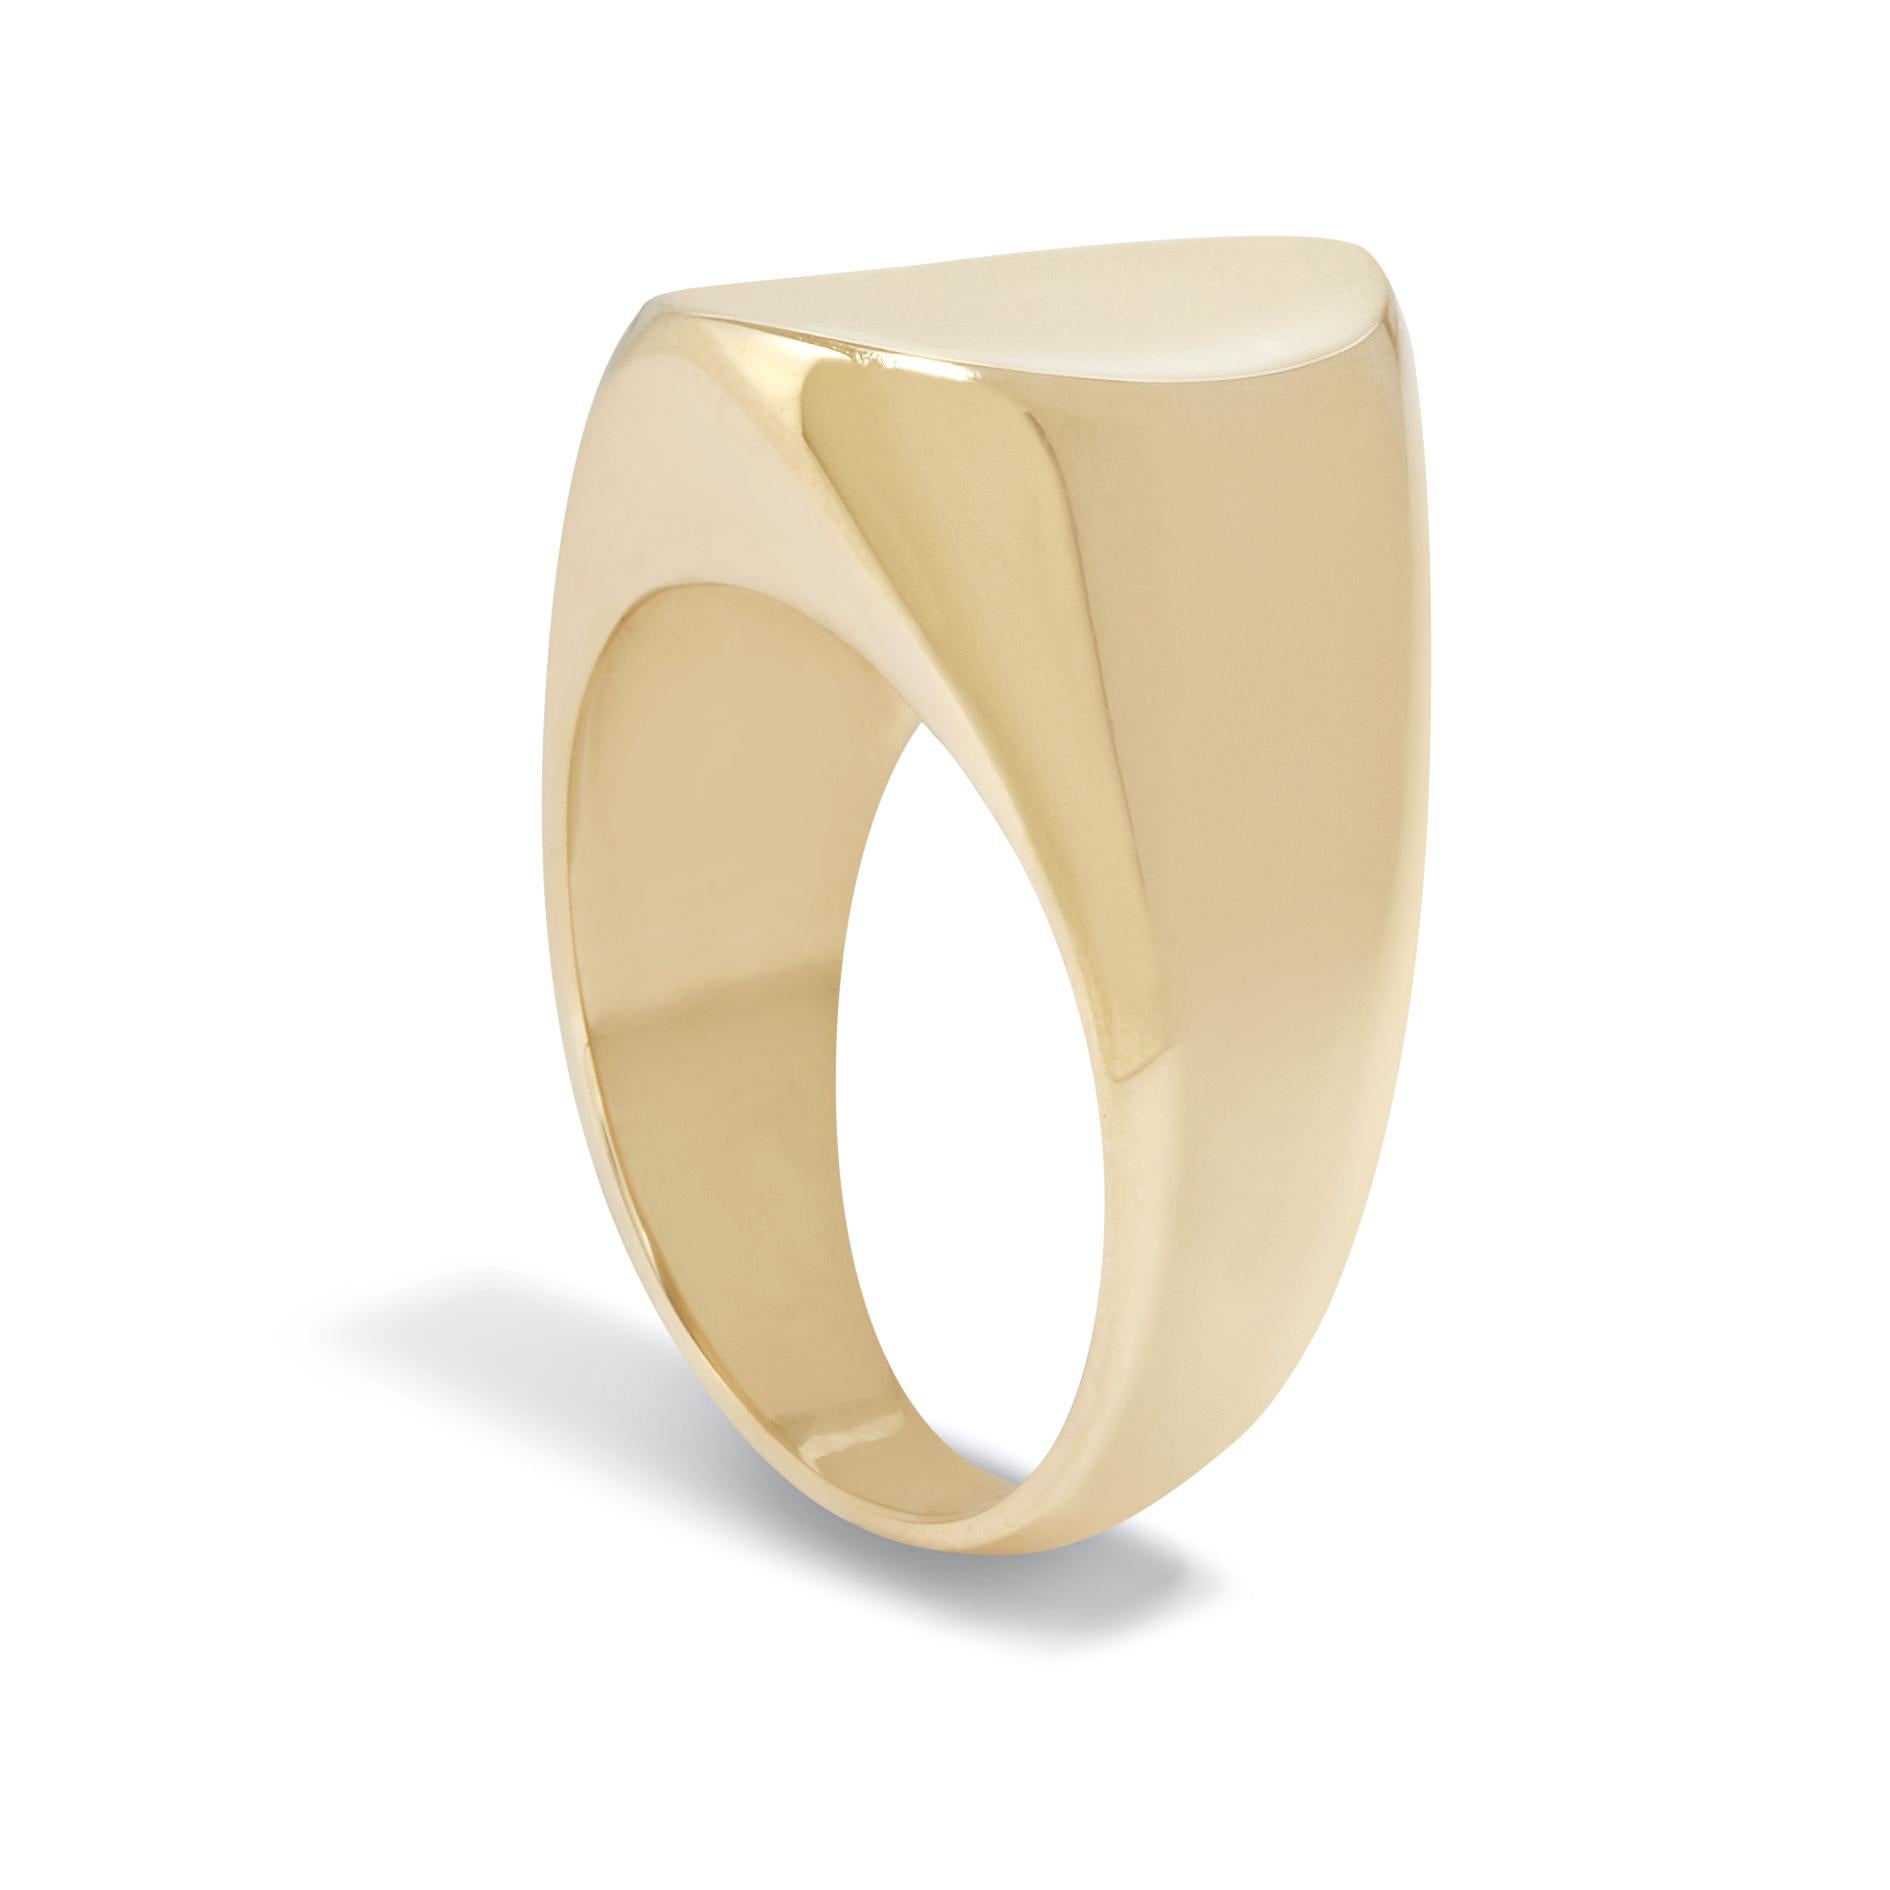 Concave Signet Ring in 9 Karat Gold by Allison Bryan For Sale 2